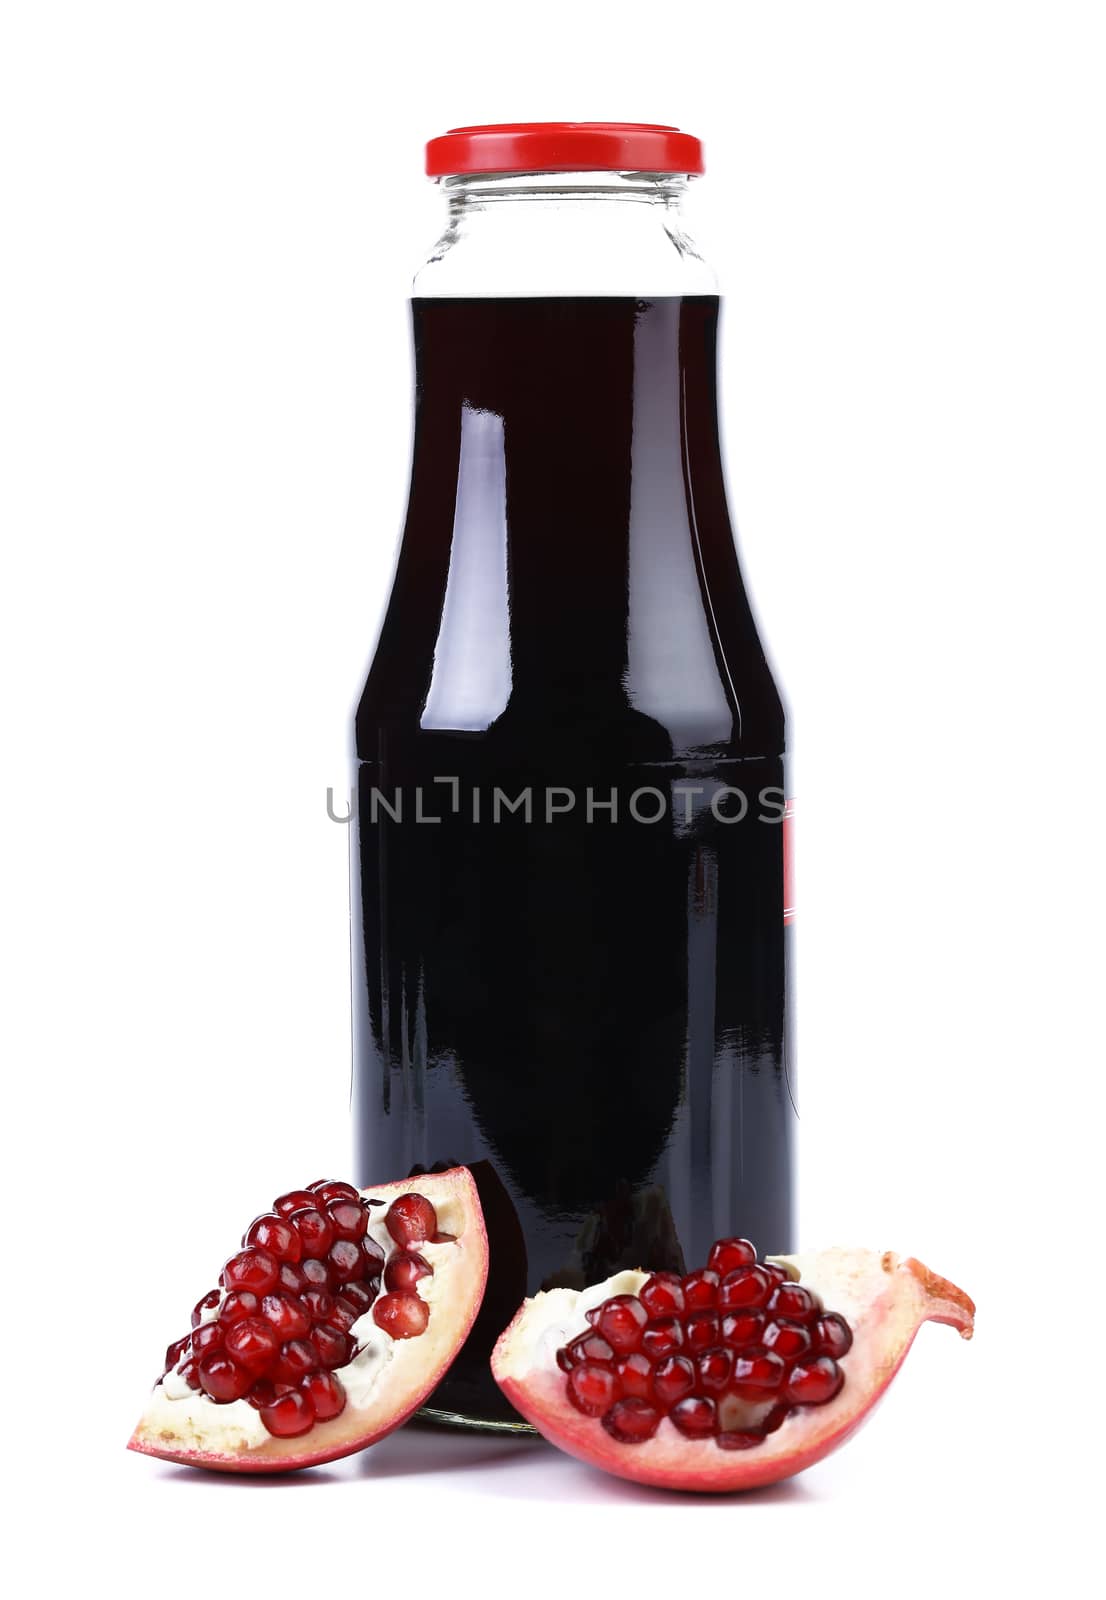 Juice and slices pomegranate on white background. Close up.